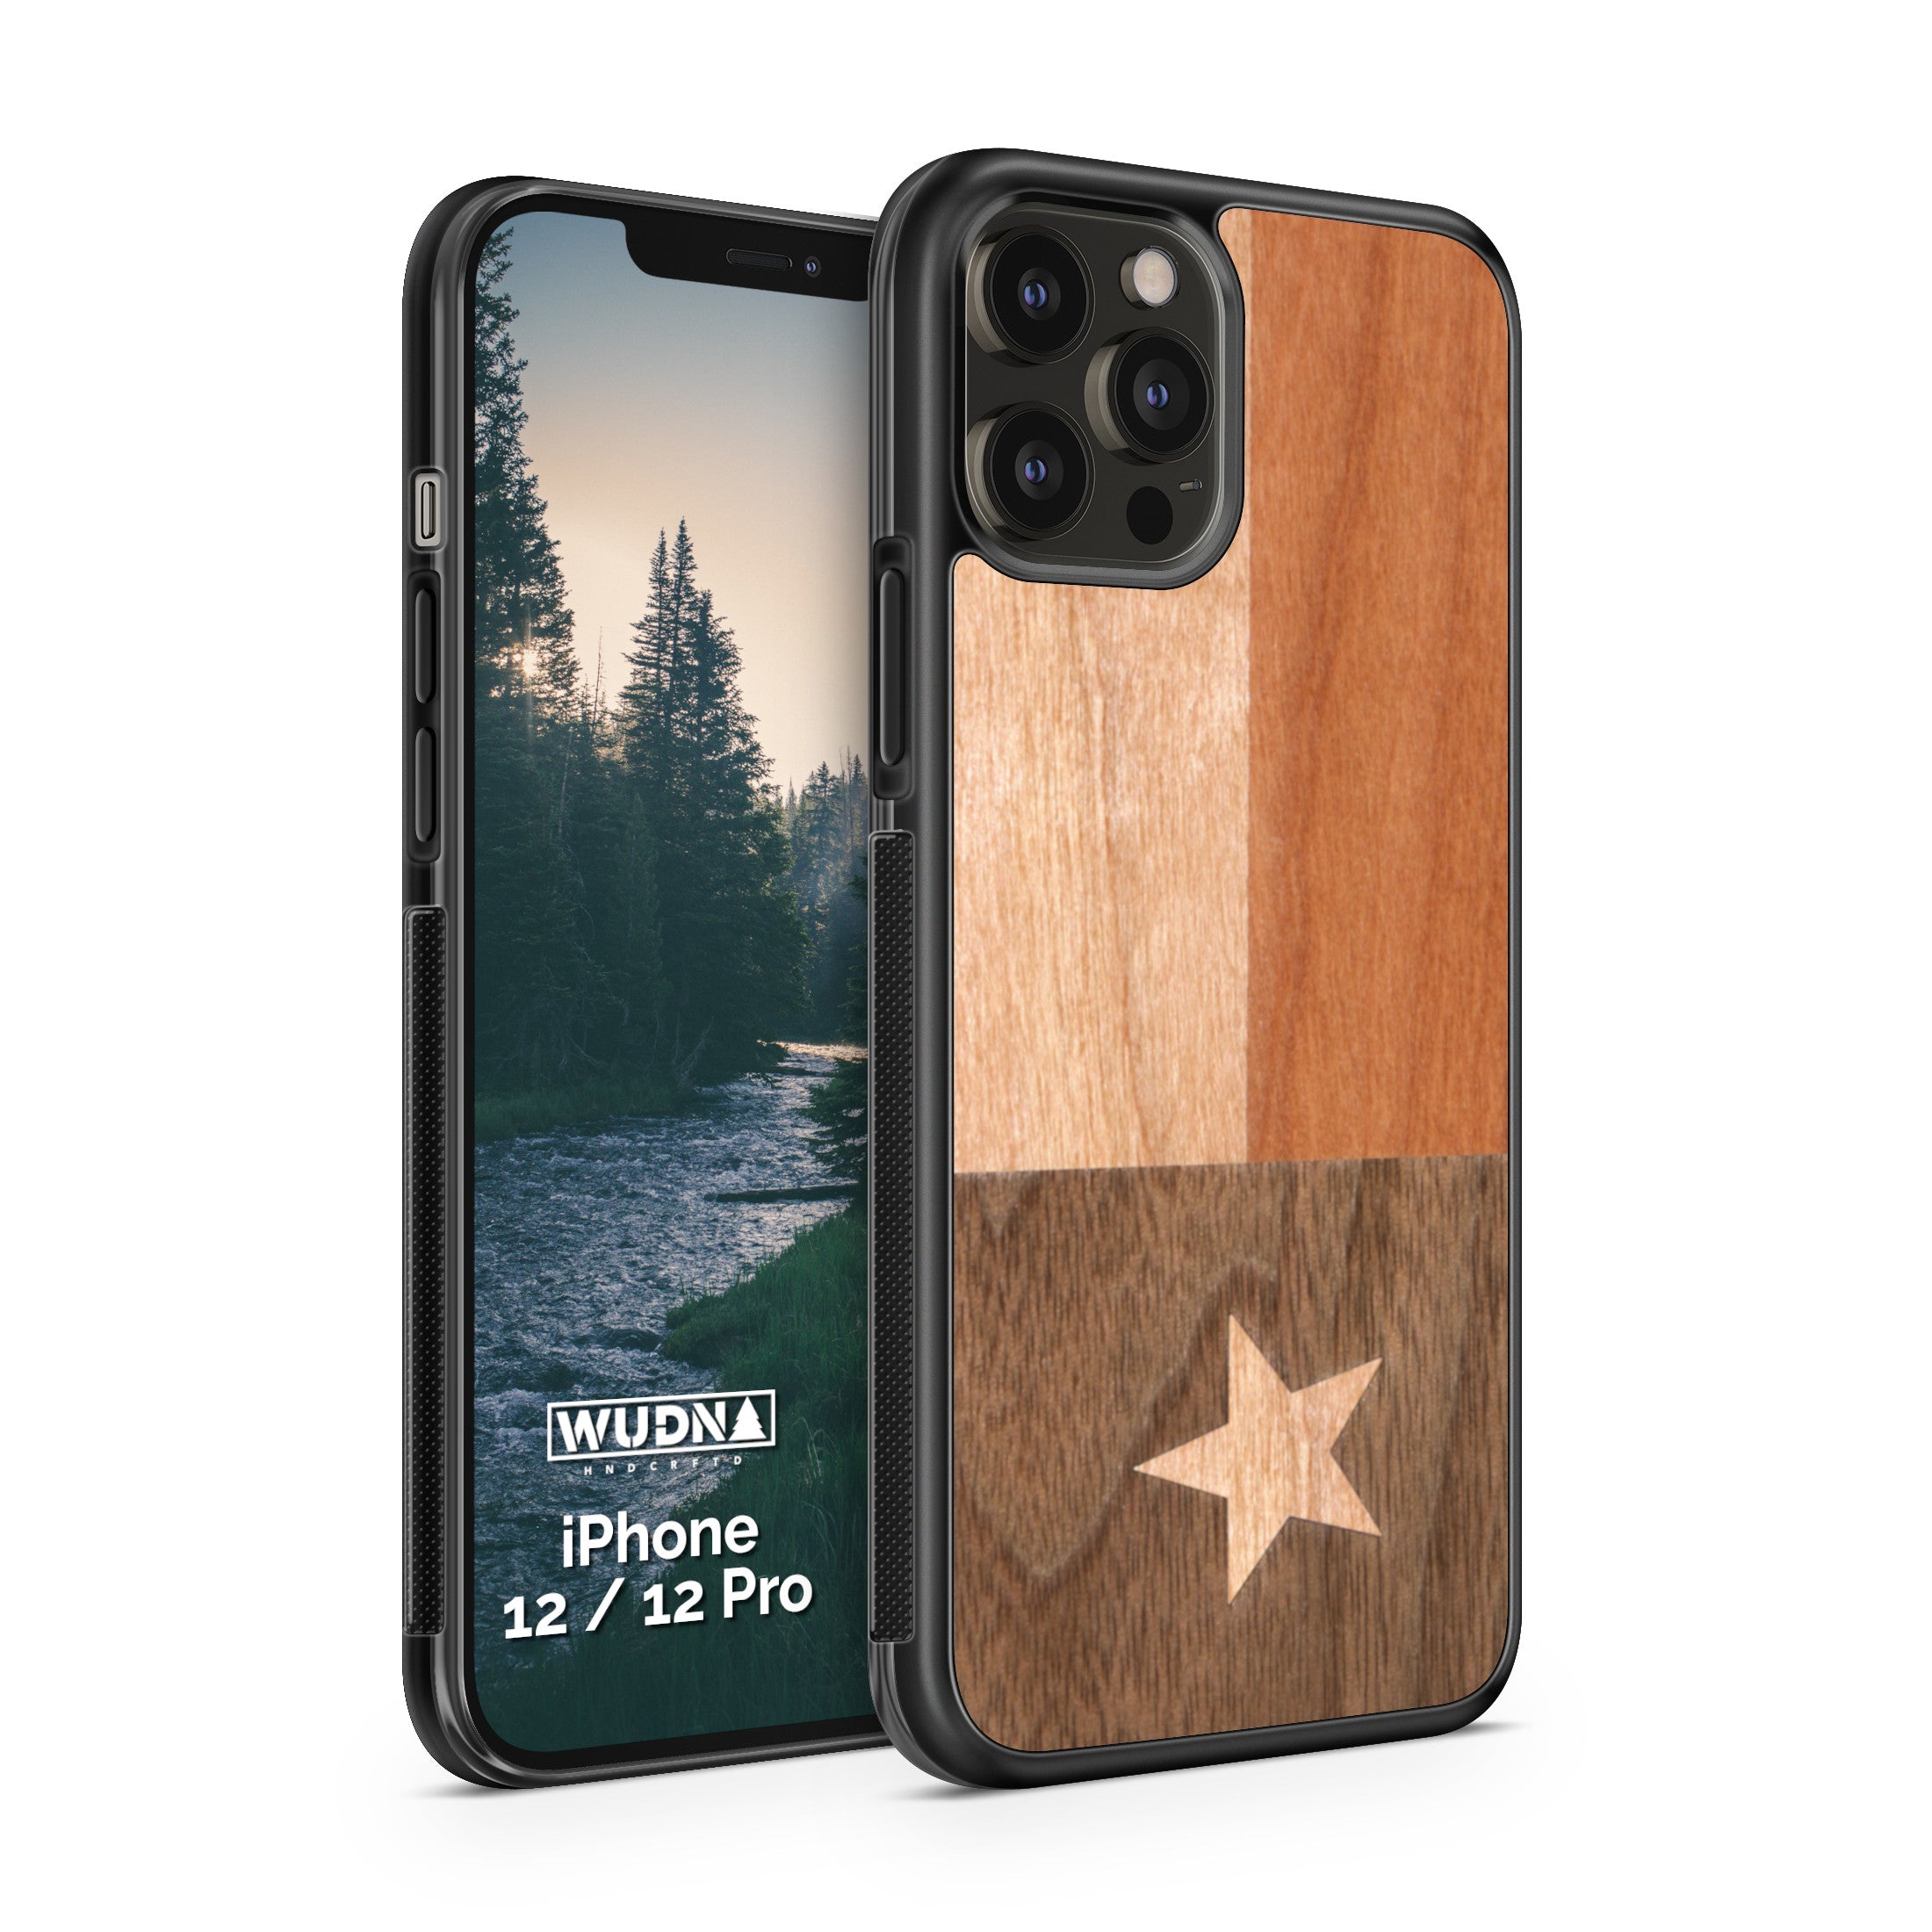 Slim Wooden iPhone Case (Texas State Flag)